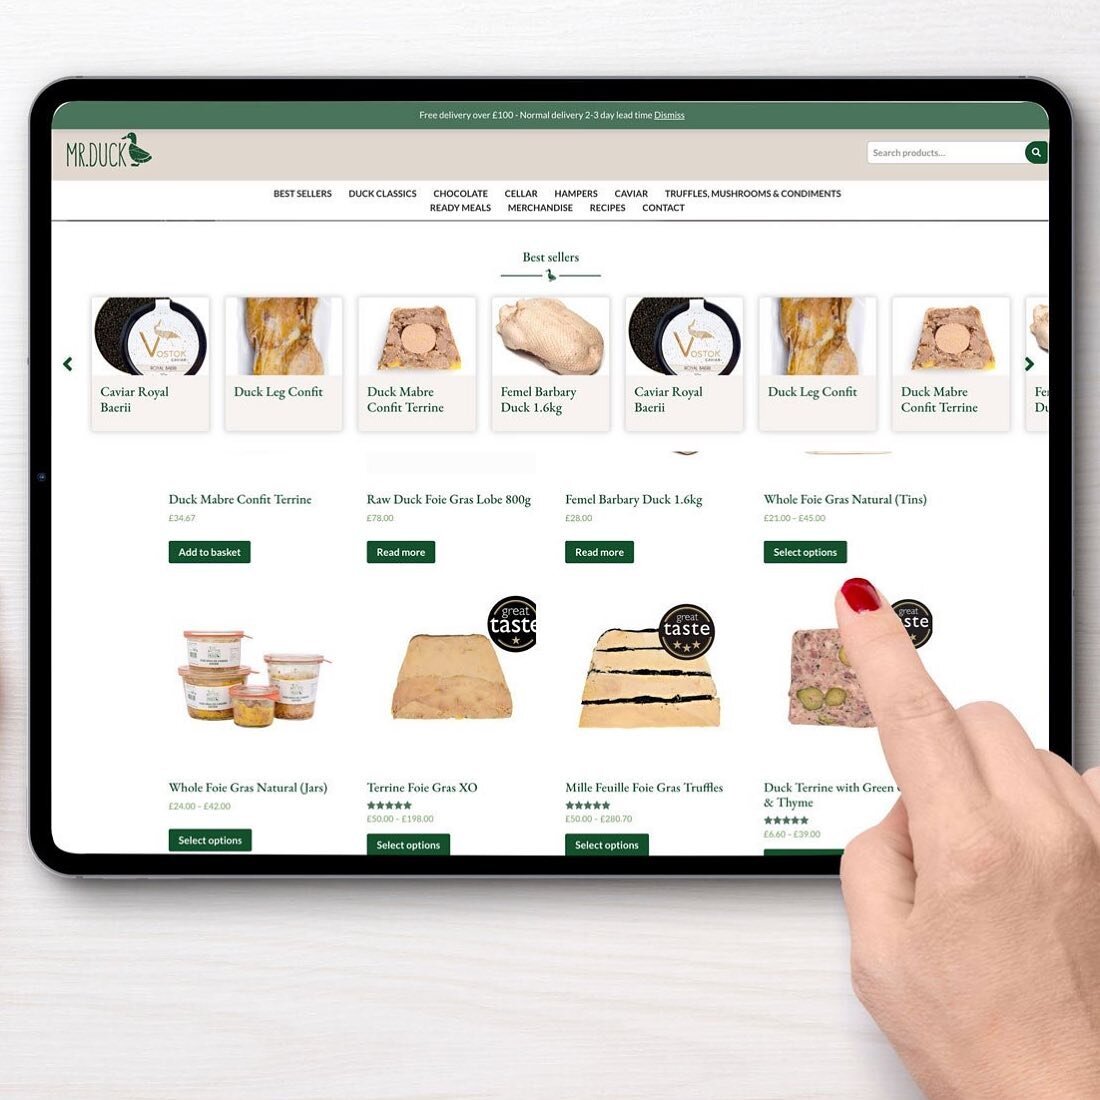 Read our latest blog - The importance of an online store and how to have the best shop in 2023 link in bio #blog #onlineshopping #websitedesign #ecommerce #bestshops #design #wordpress